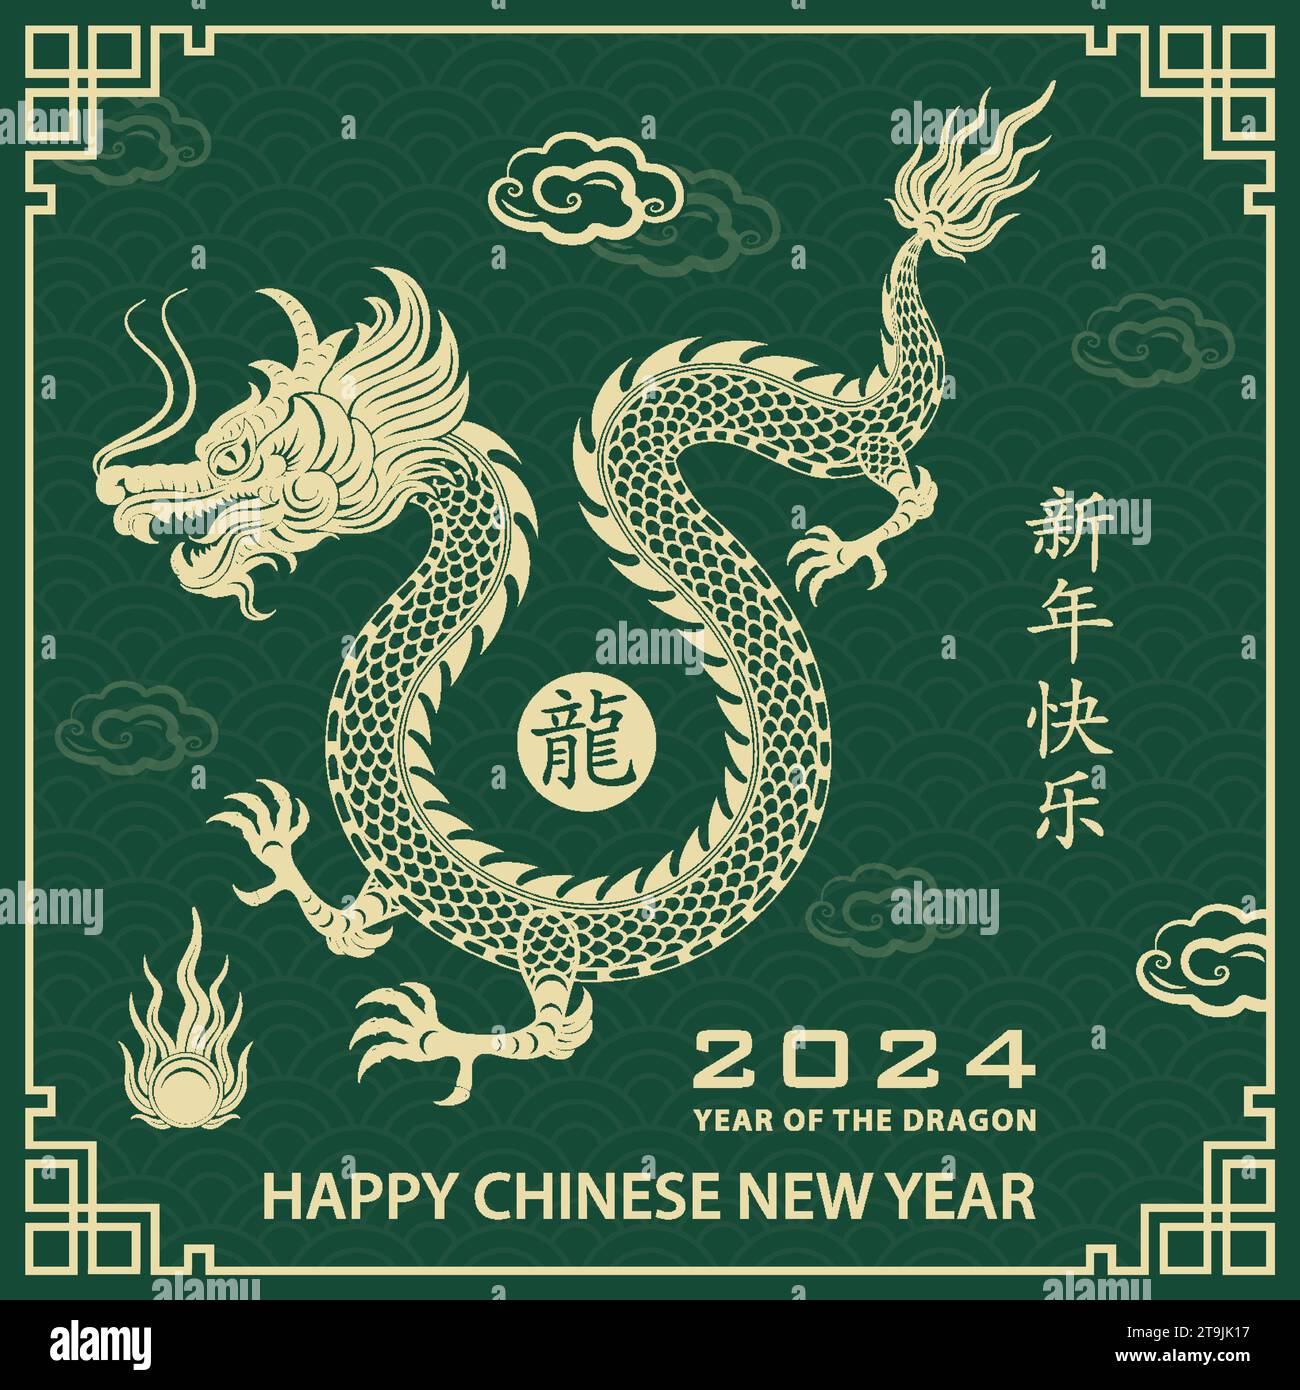 Happy Chinese new year 2024 Zodiac sign, year of the Dragon, with